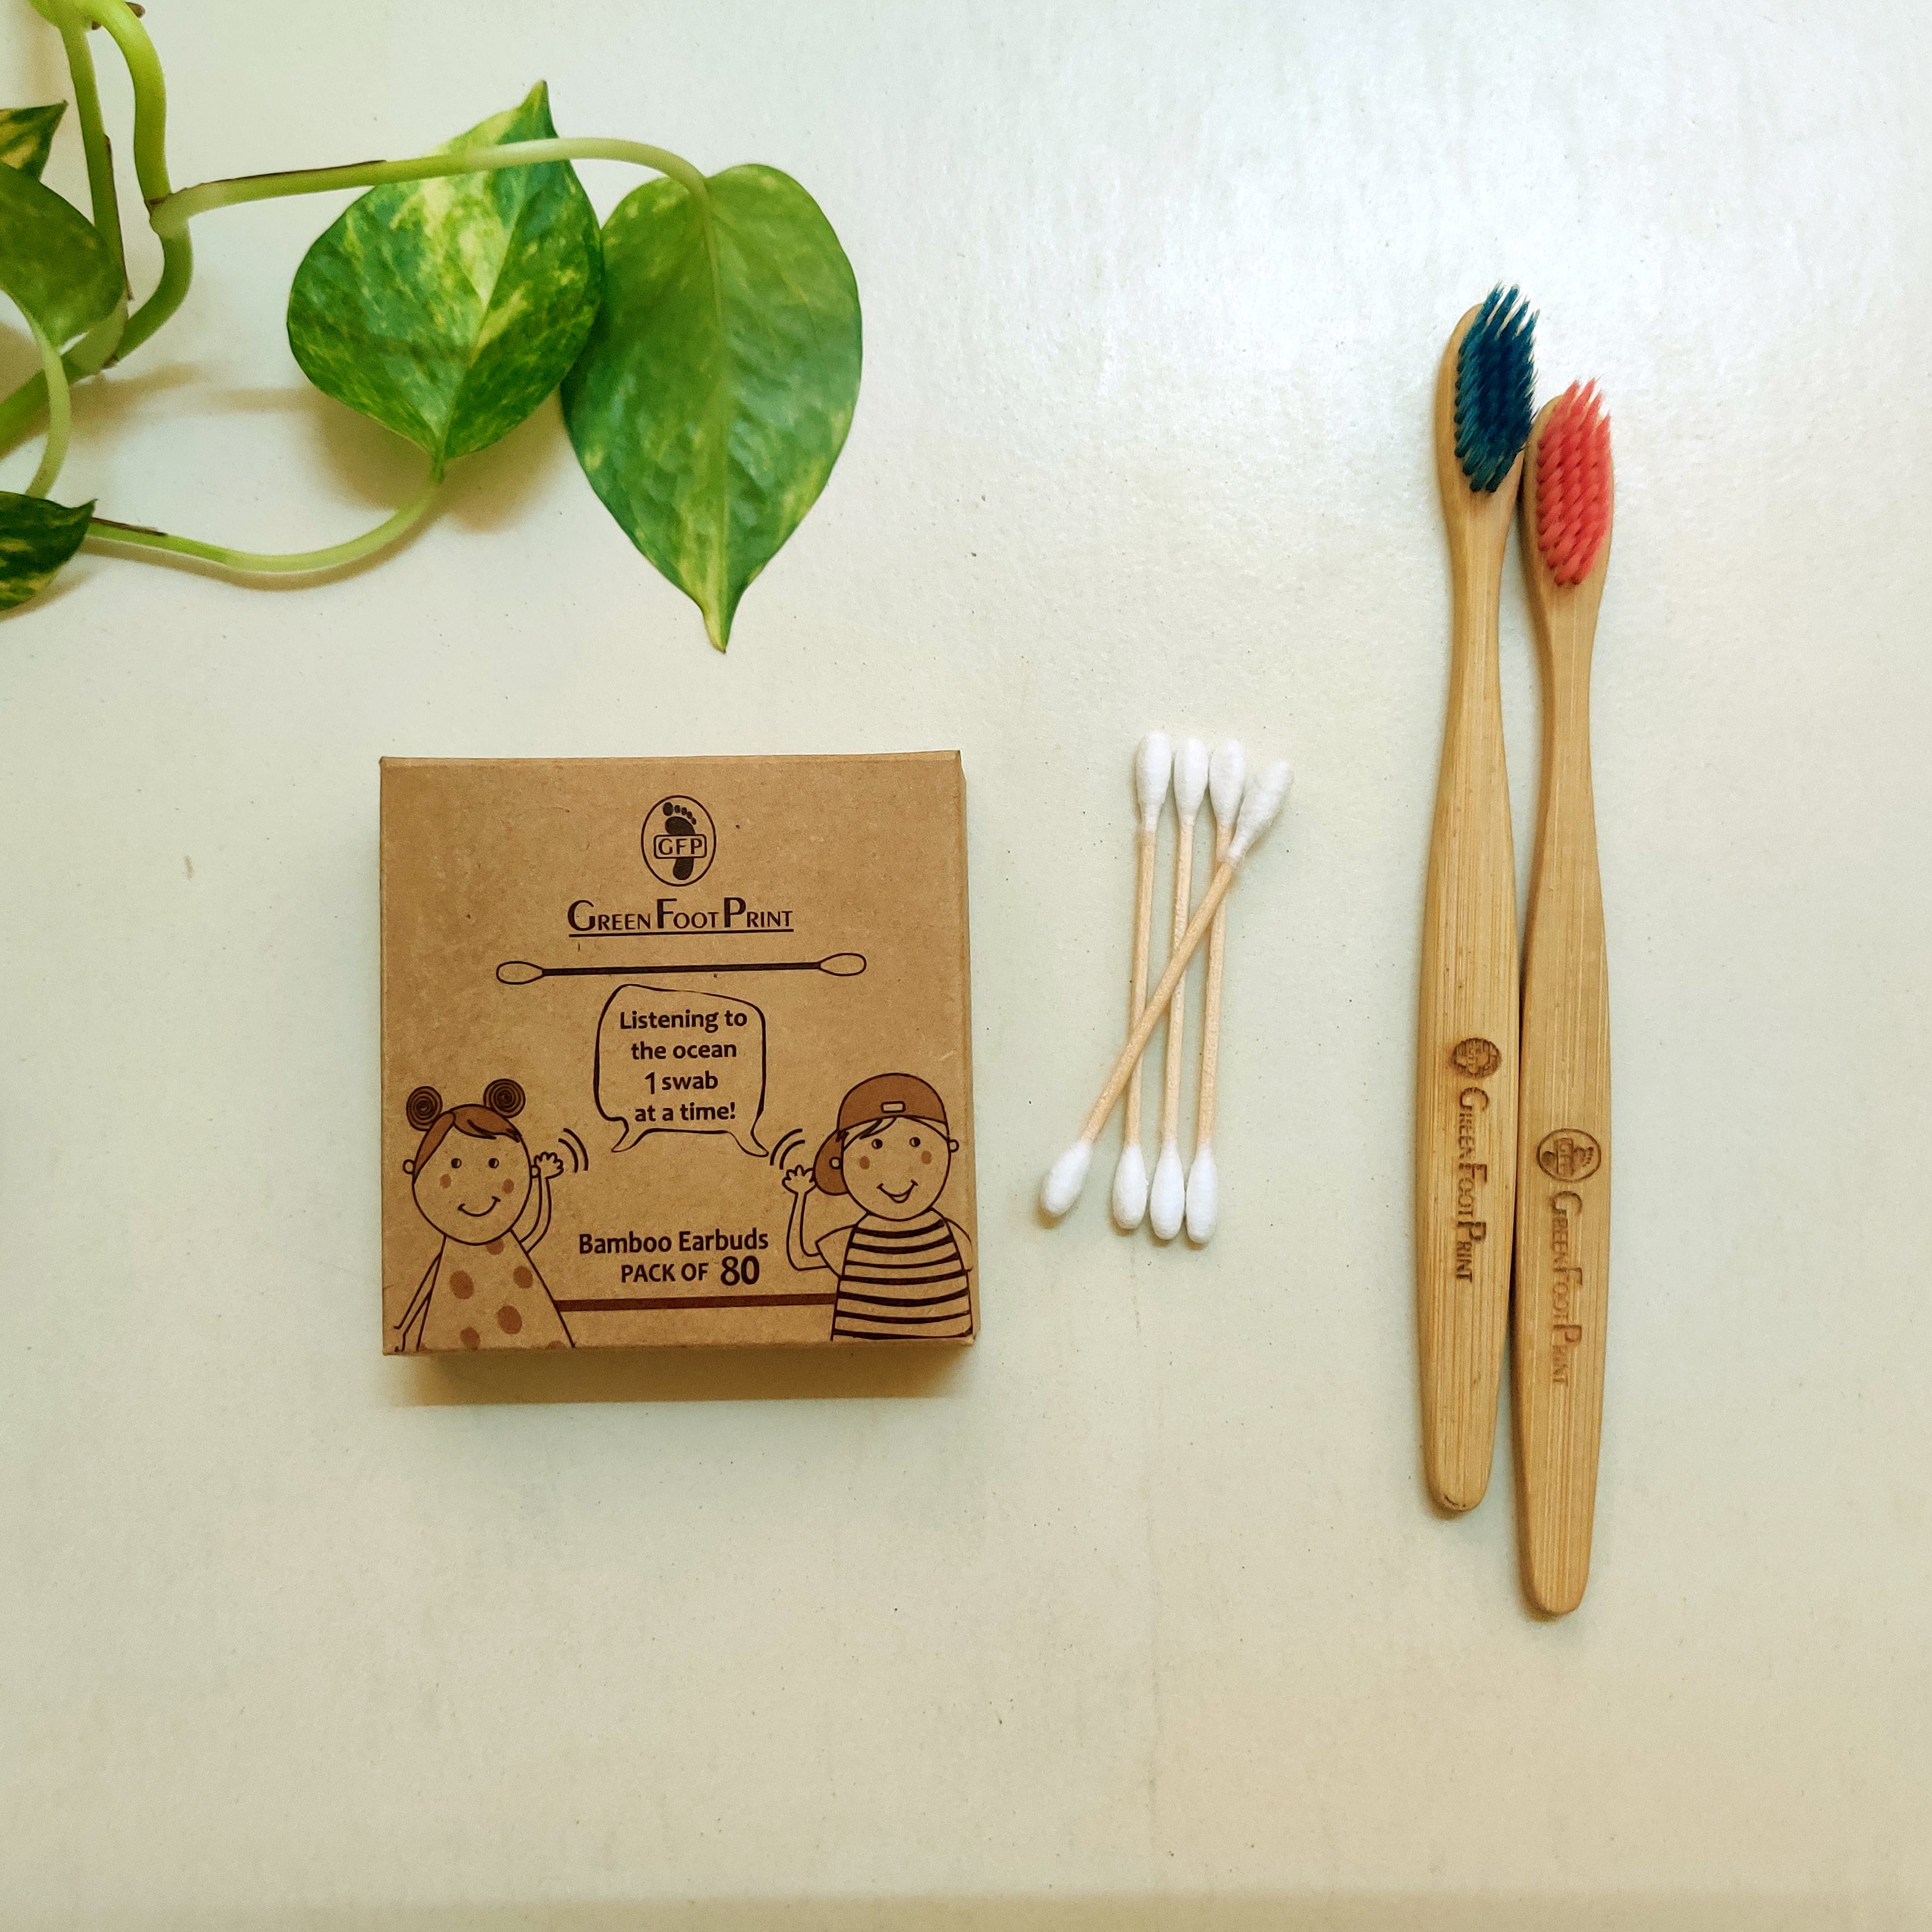 Natural Bamboo Toothbrush - Pack of 2 & Bamboo Earbuds / swabs - Pack of 80 - Green foot print - BeKarmic